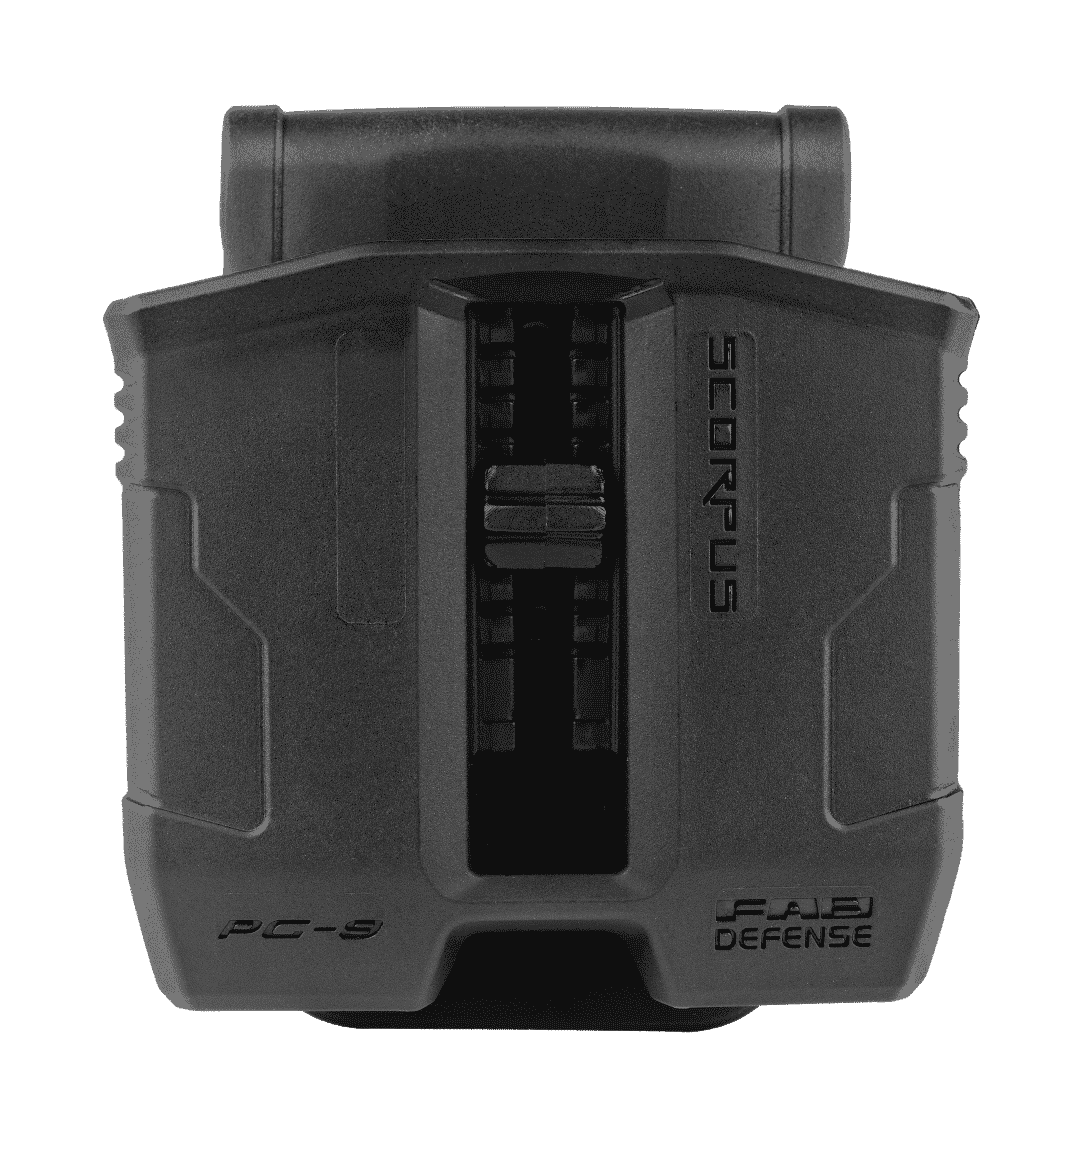 FAB Defence PS-9 Double Magazine Pouch for steel magazines 9/40 made in israeal